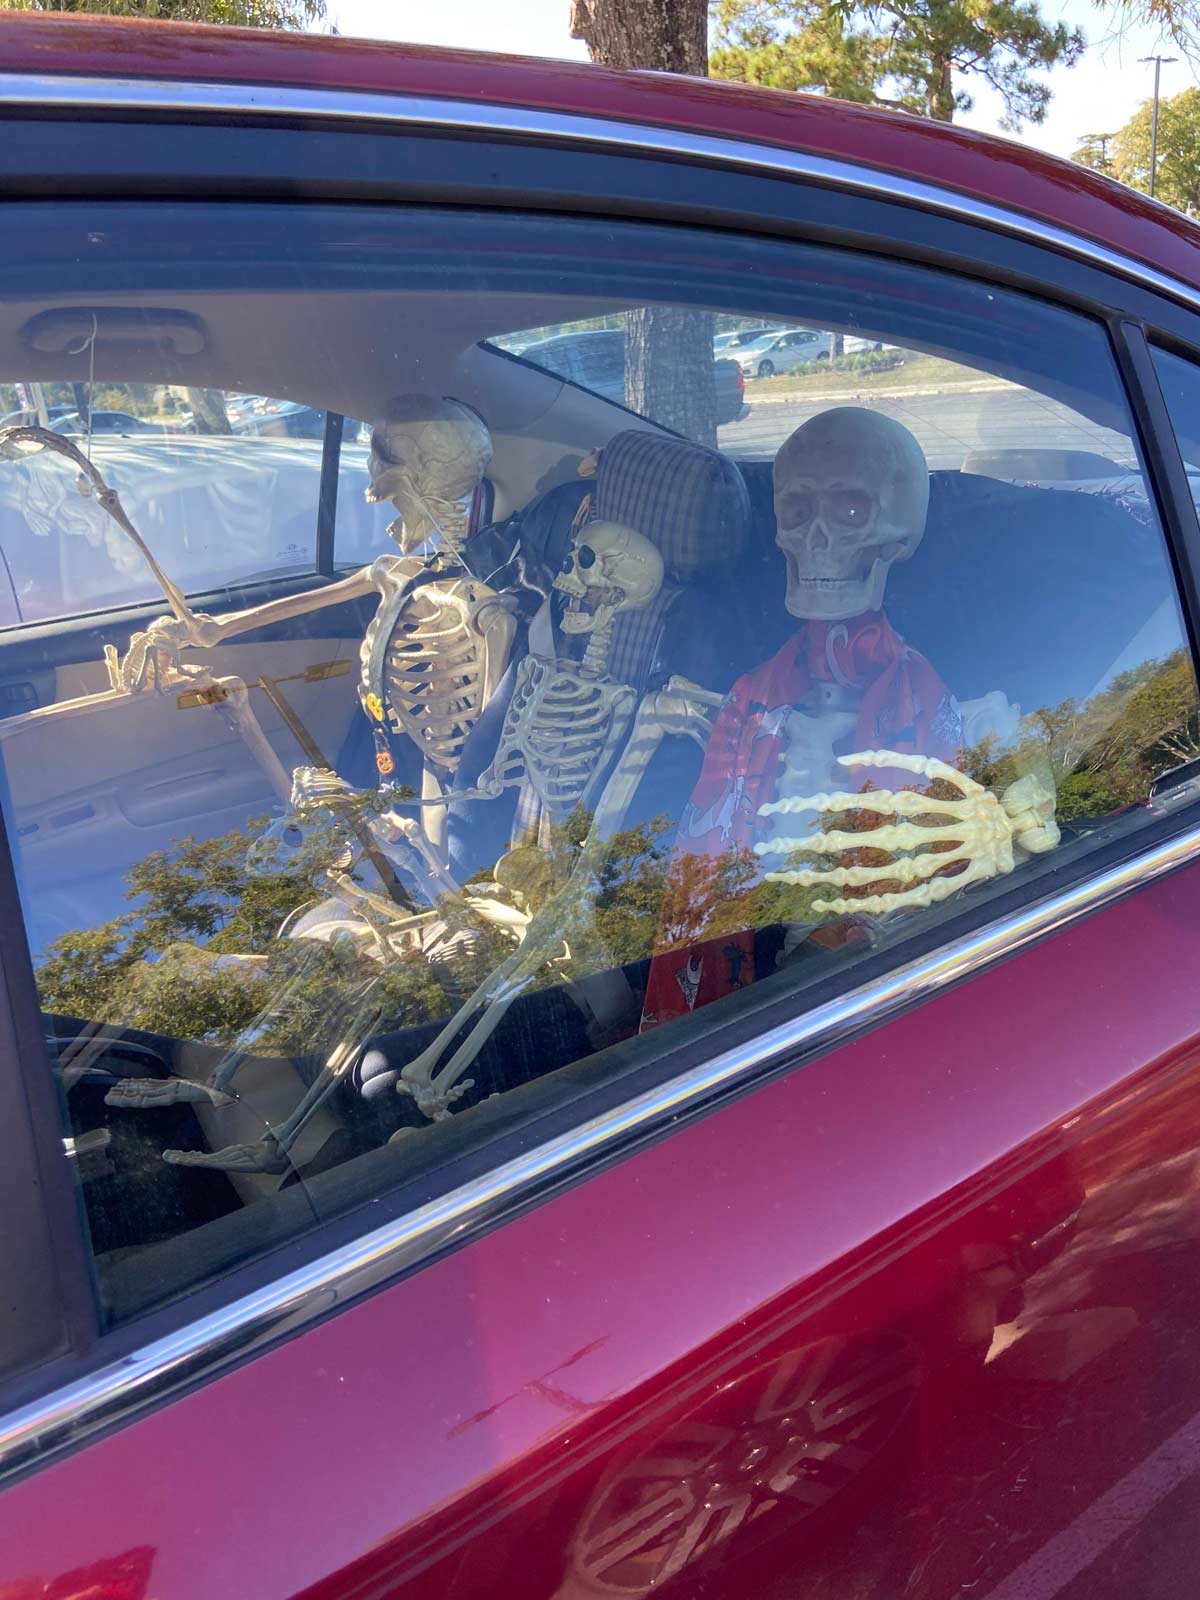 How my coworker decorated her car for Halloween